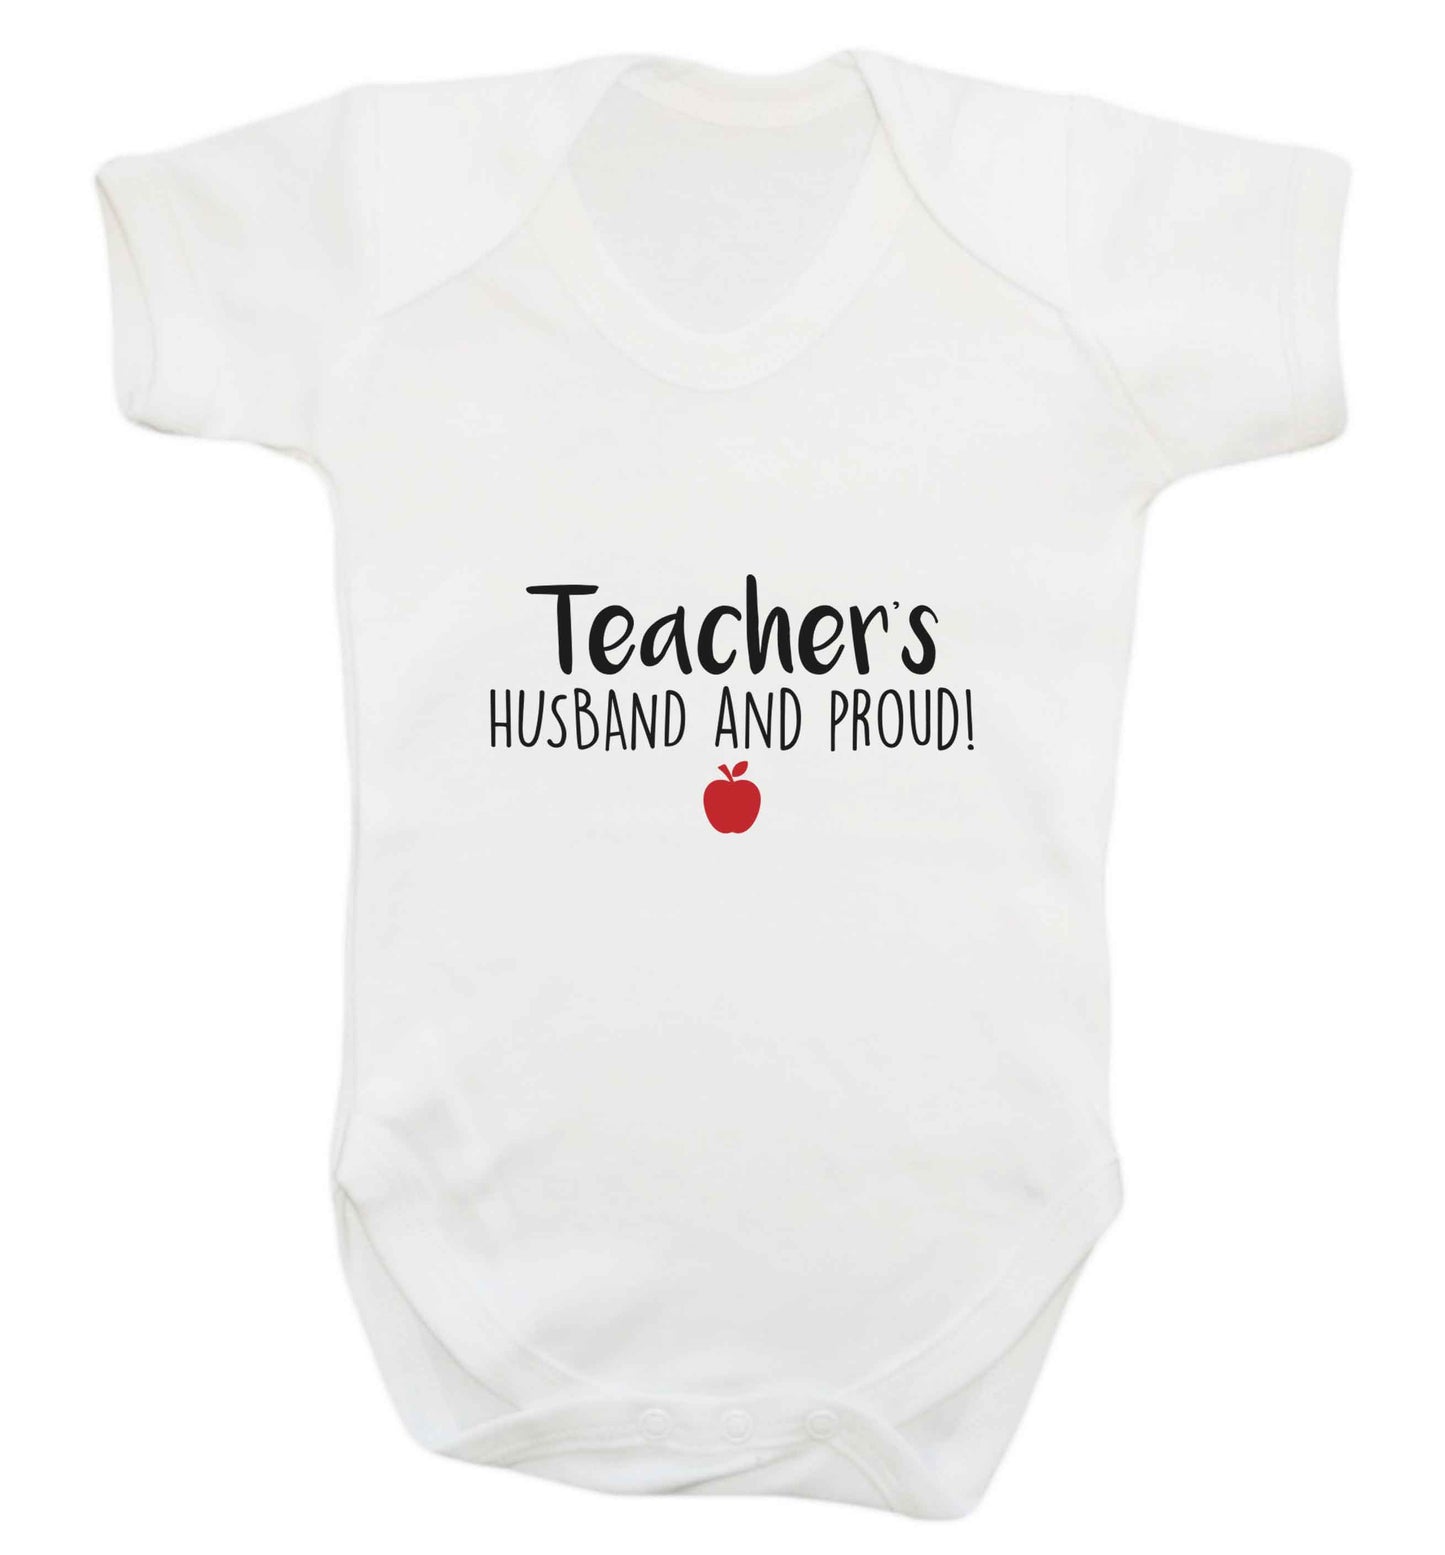 Teachers husband and proud baby vest white 18-24 months